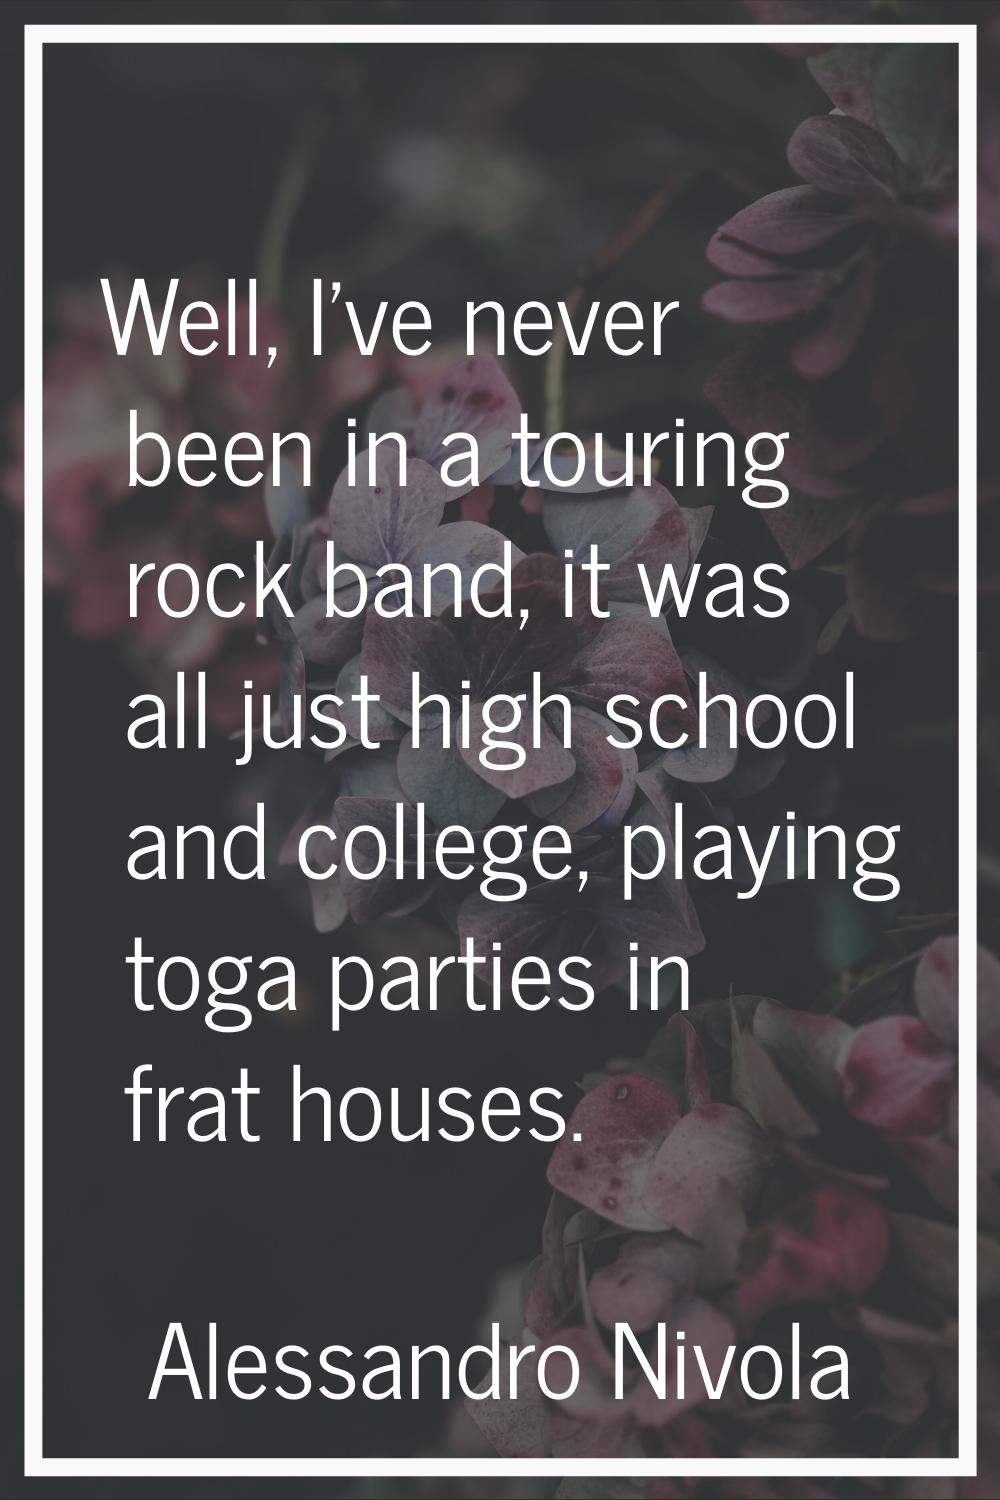 Well, I've never been in a touring rock band, it was all just high school and college, playing toga